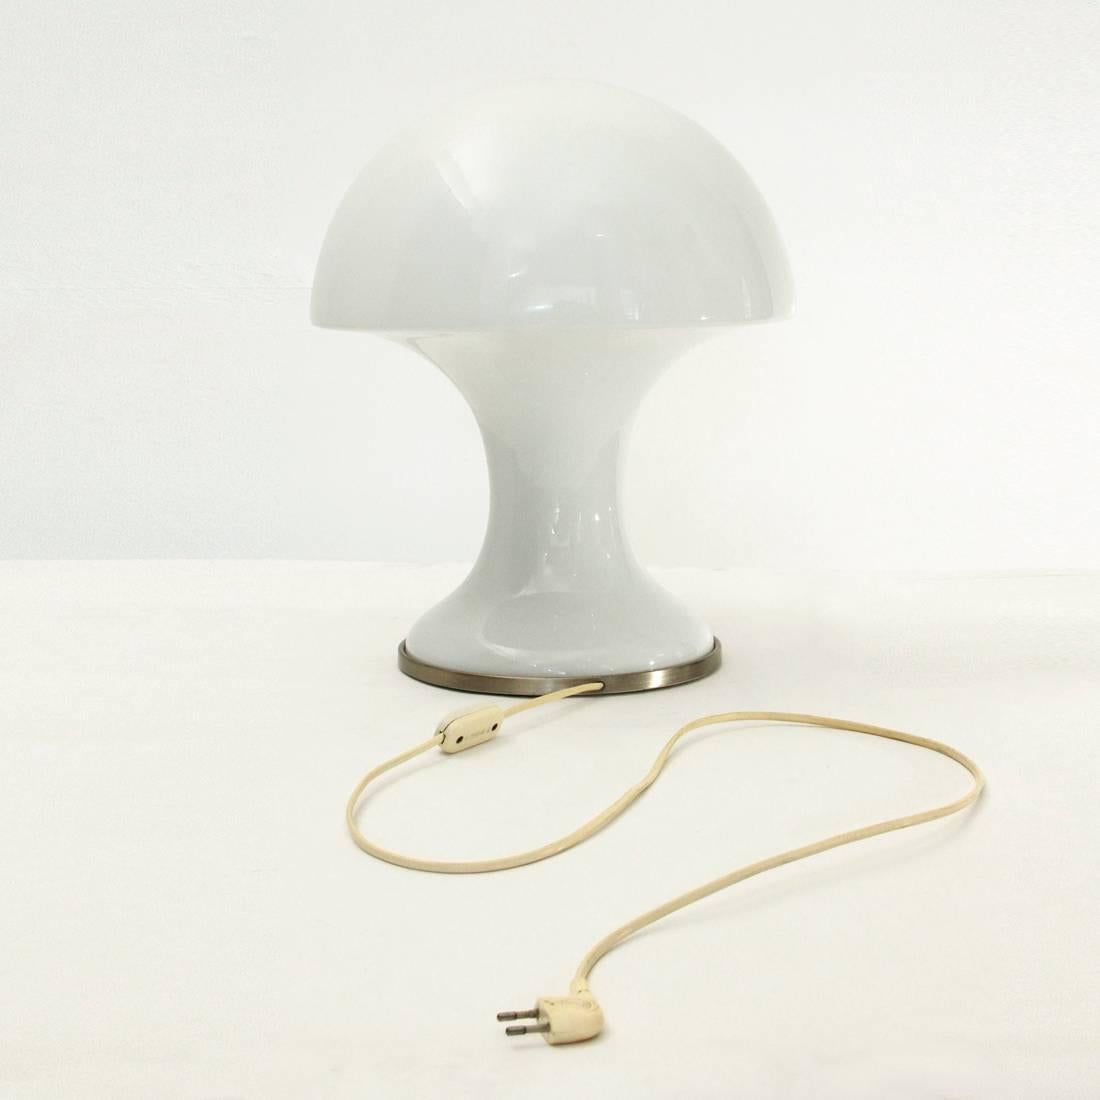 1970s lamp produced by Luci illuminazione d'interni.
Aluminium base on which is supported a white glass diffuser.
Very good general conditions.

Dimensions: Diameter 35 cm, height 45 cm.